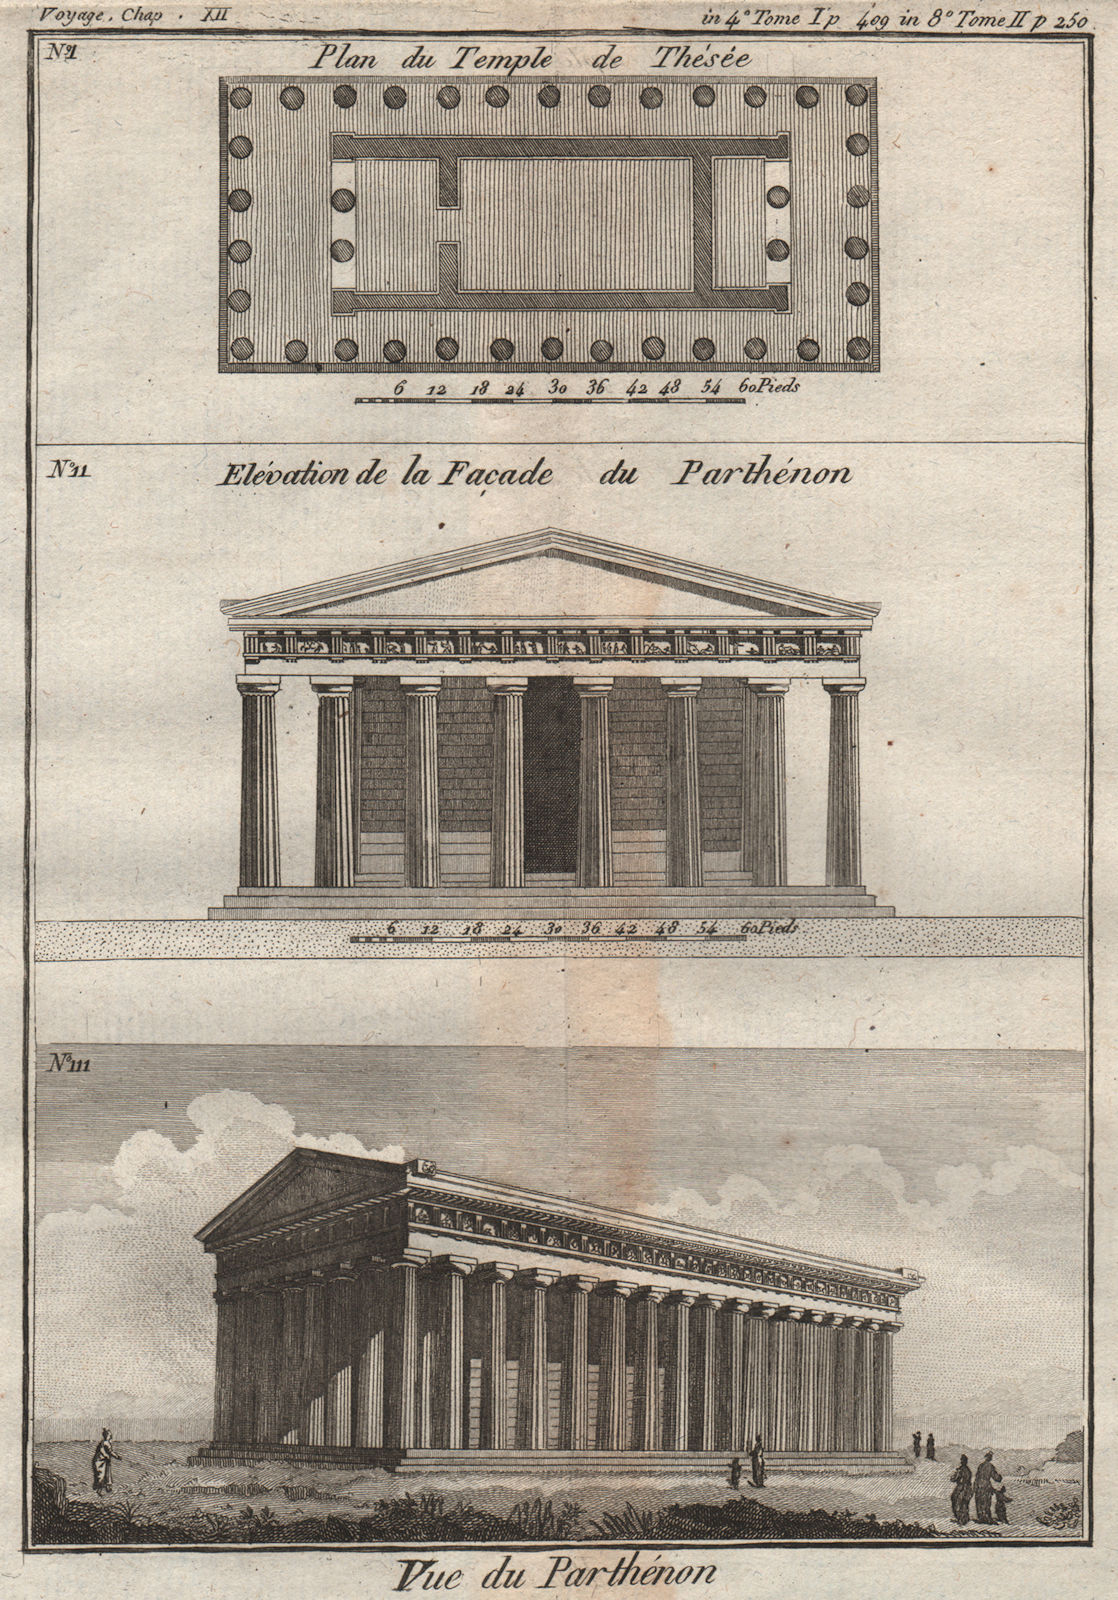 ANCIENT GREEK TEMPLES. Temple of Theseus & the Parthenon. Athens 1790 old map